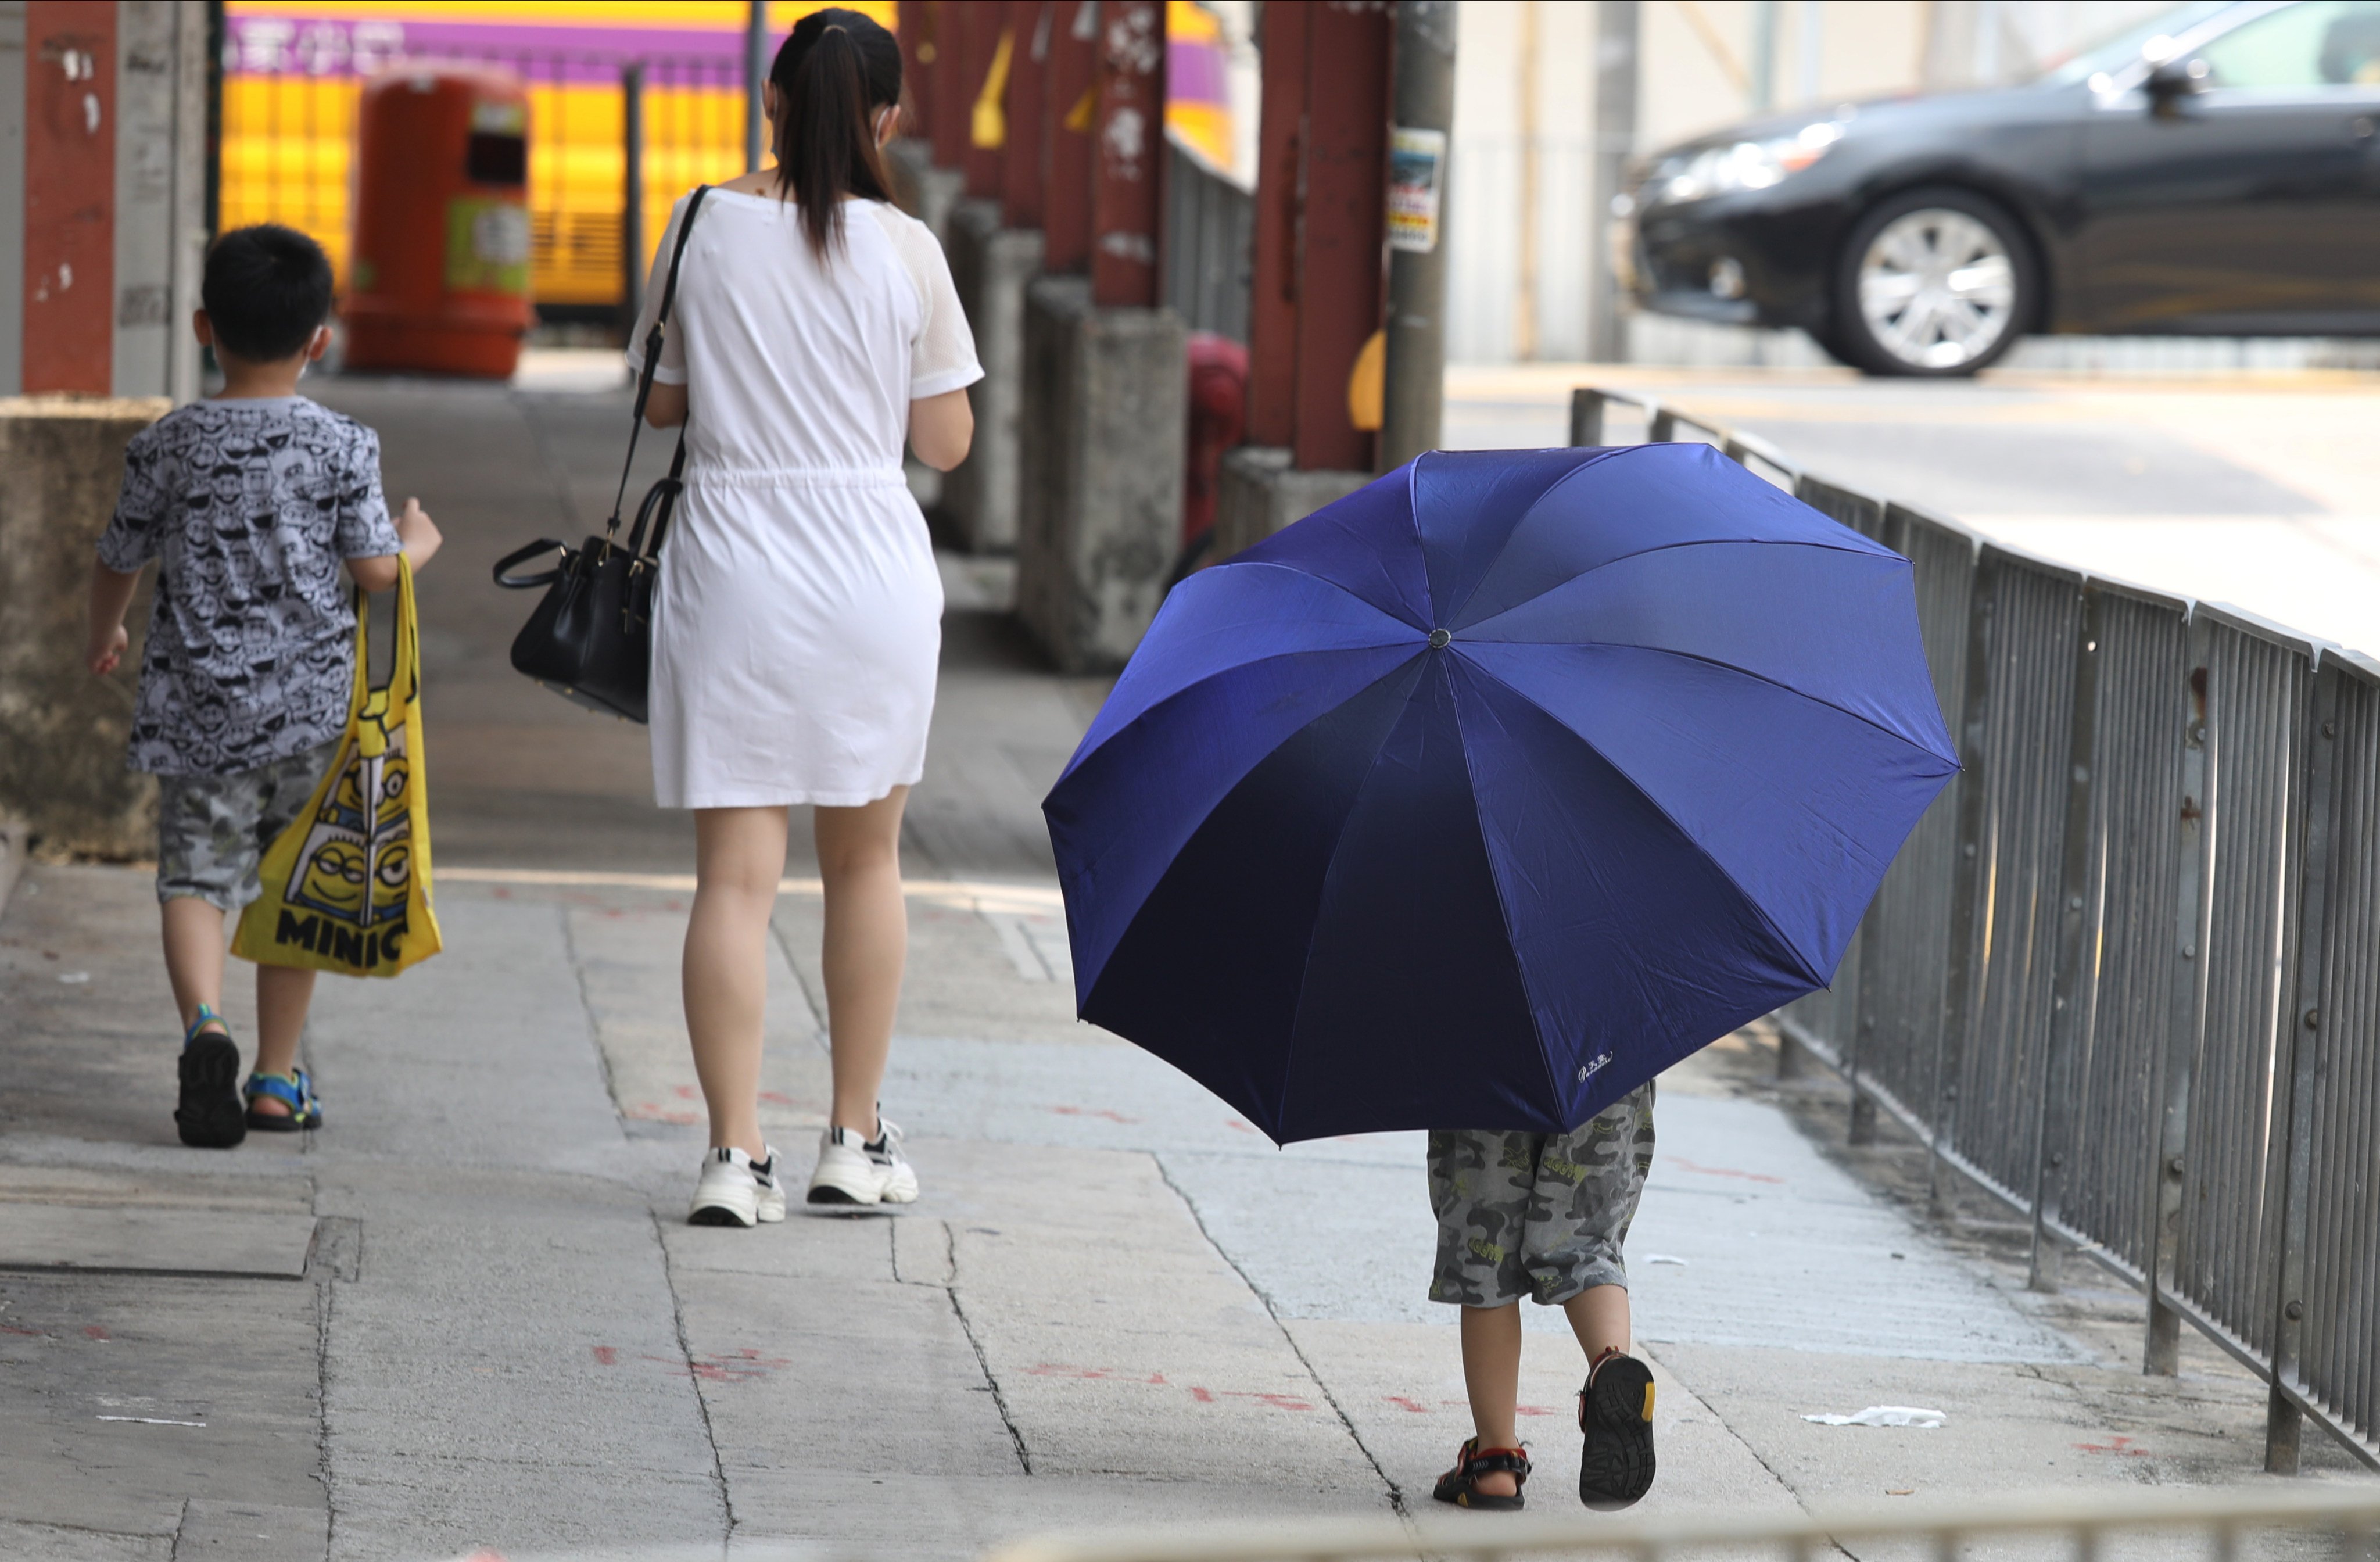 A child carries a large umbrella in Kowloon City, in September 2020. Children will not be properly respected until, like adults, they fully enjoy the protections of the criminal law. Photo: Nora Tam